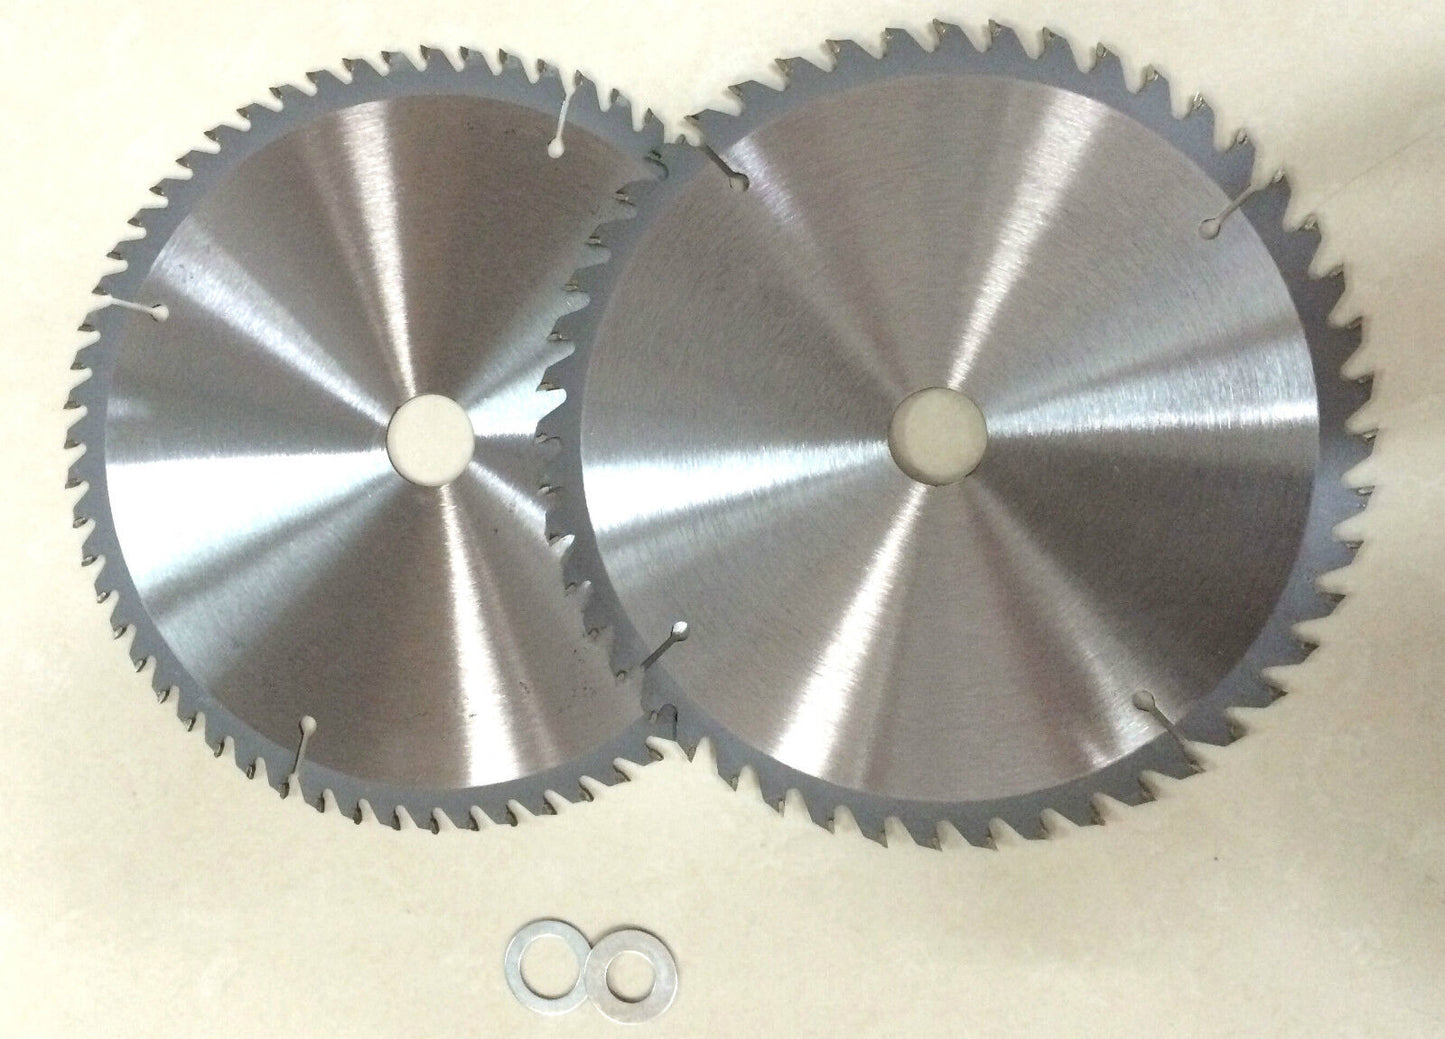 **2PC Circular Saw Blades 250mm 48T,60Teeth 30MM BORE With 2 Reduction TCT CUTTI